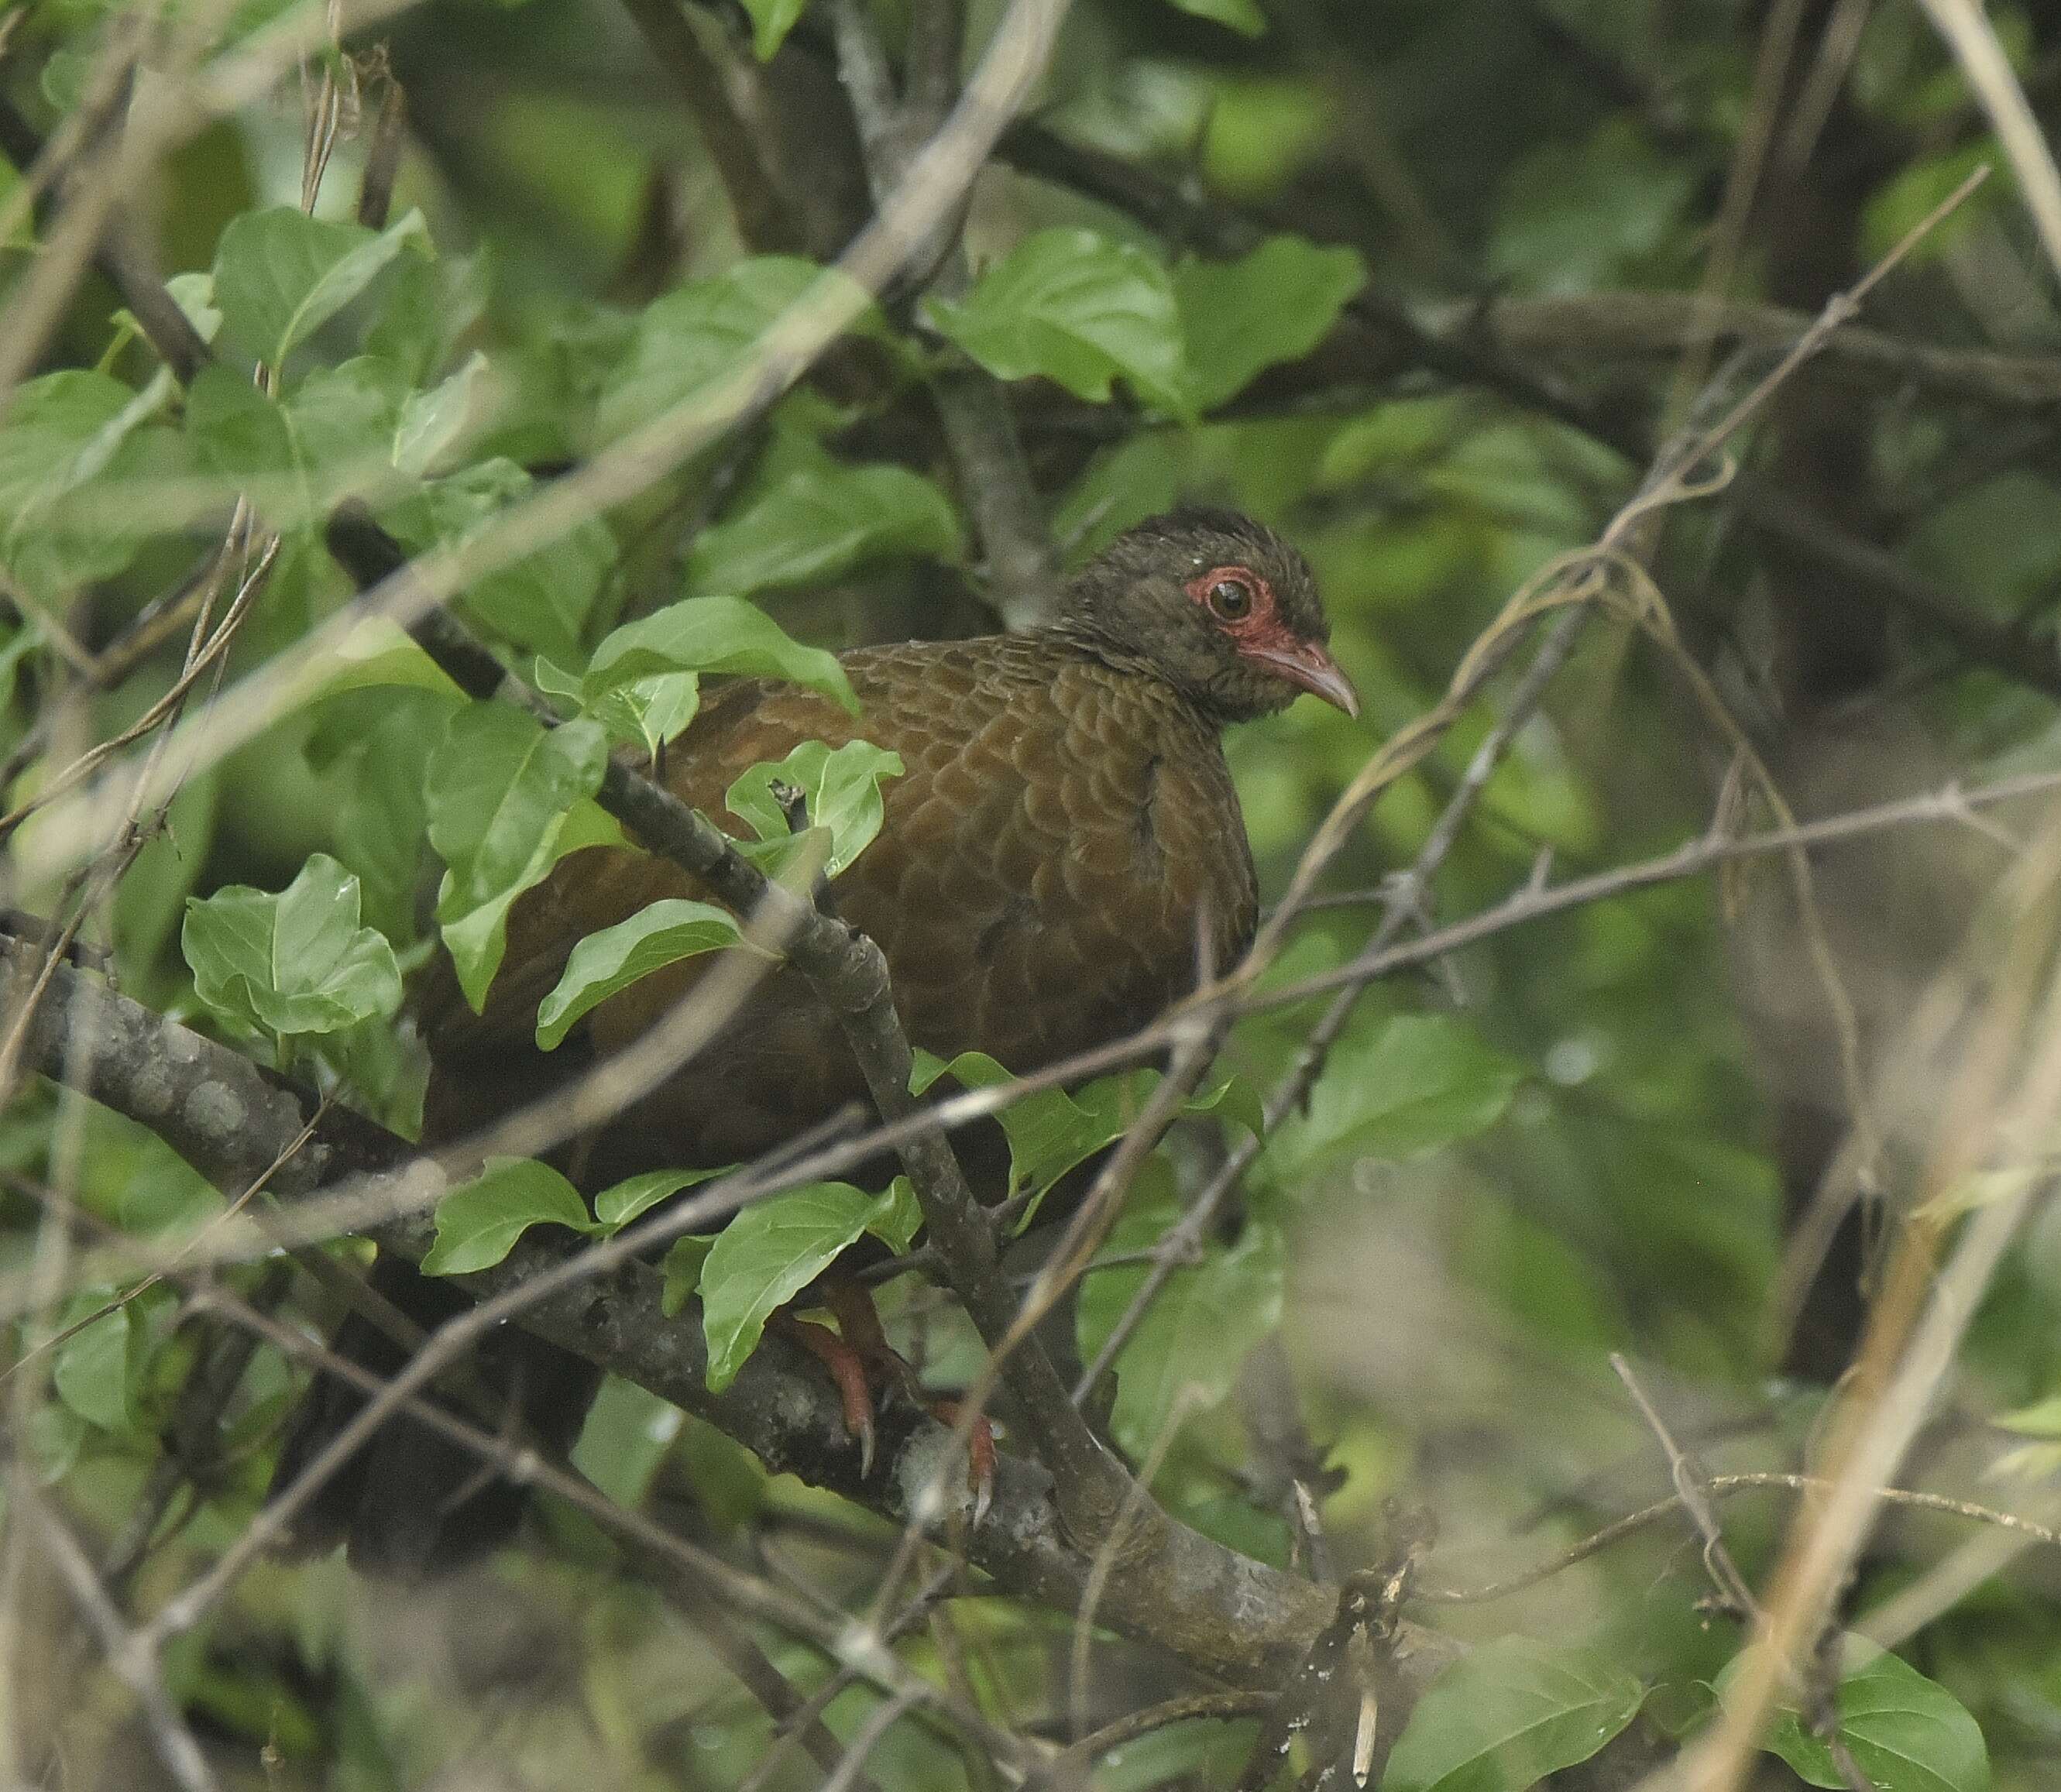 Image of Red-necked Francolin